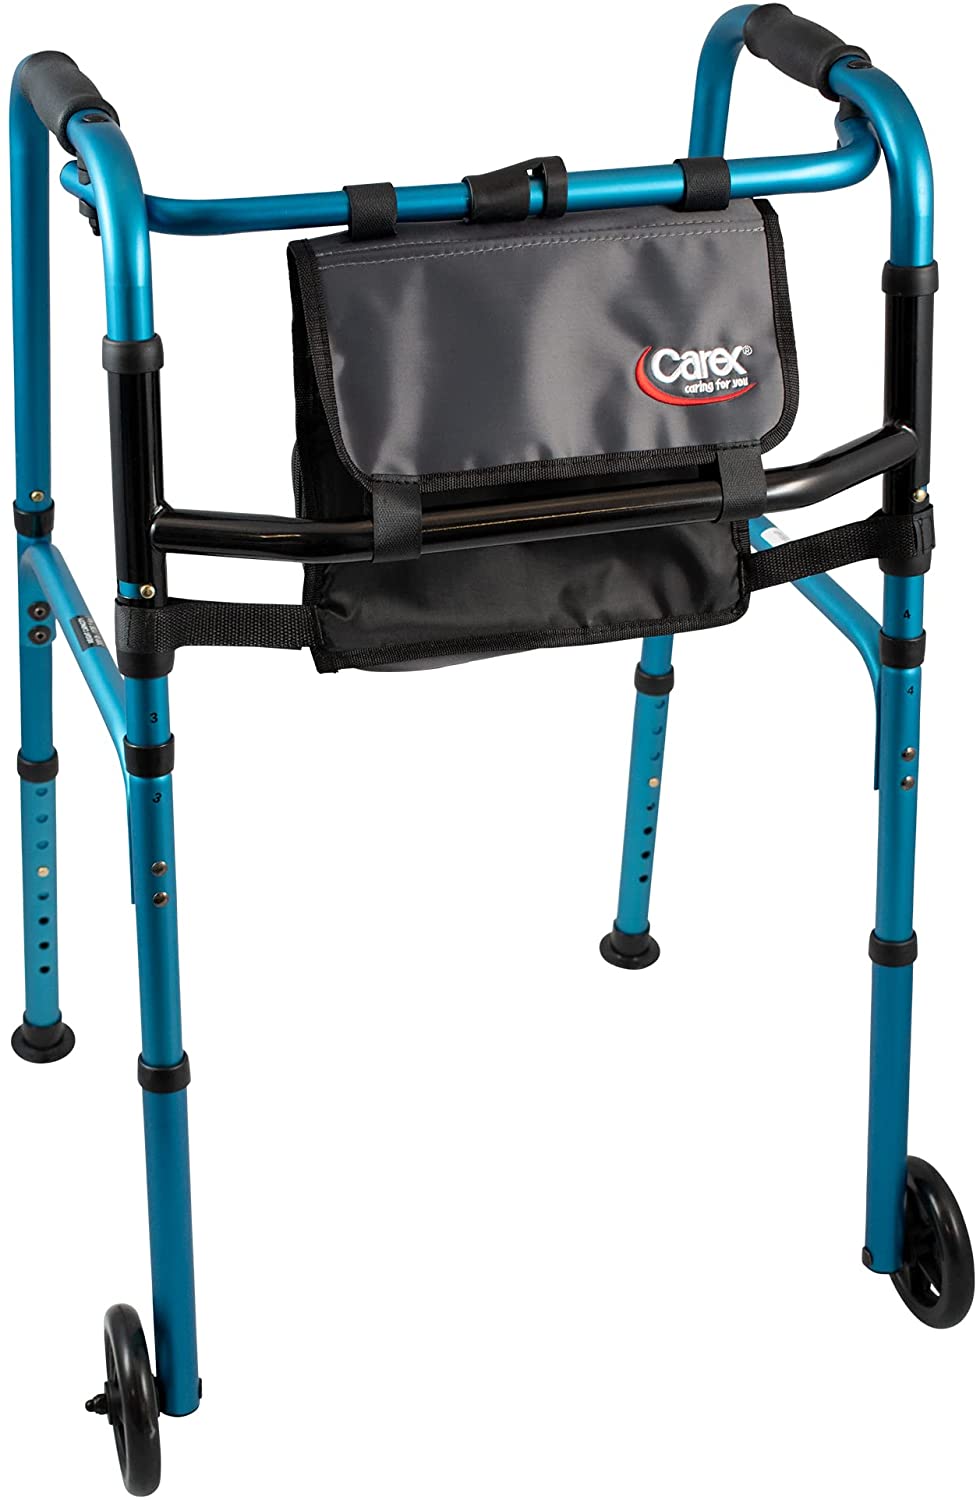 A front view of the Carex Explorer Folding Walker with its carrying bag